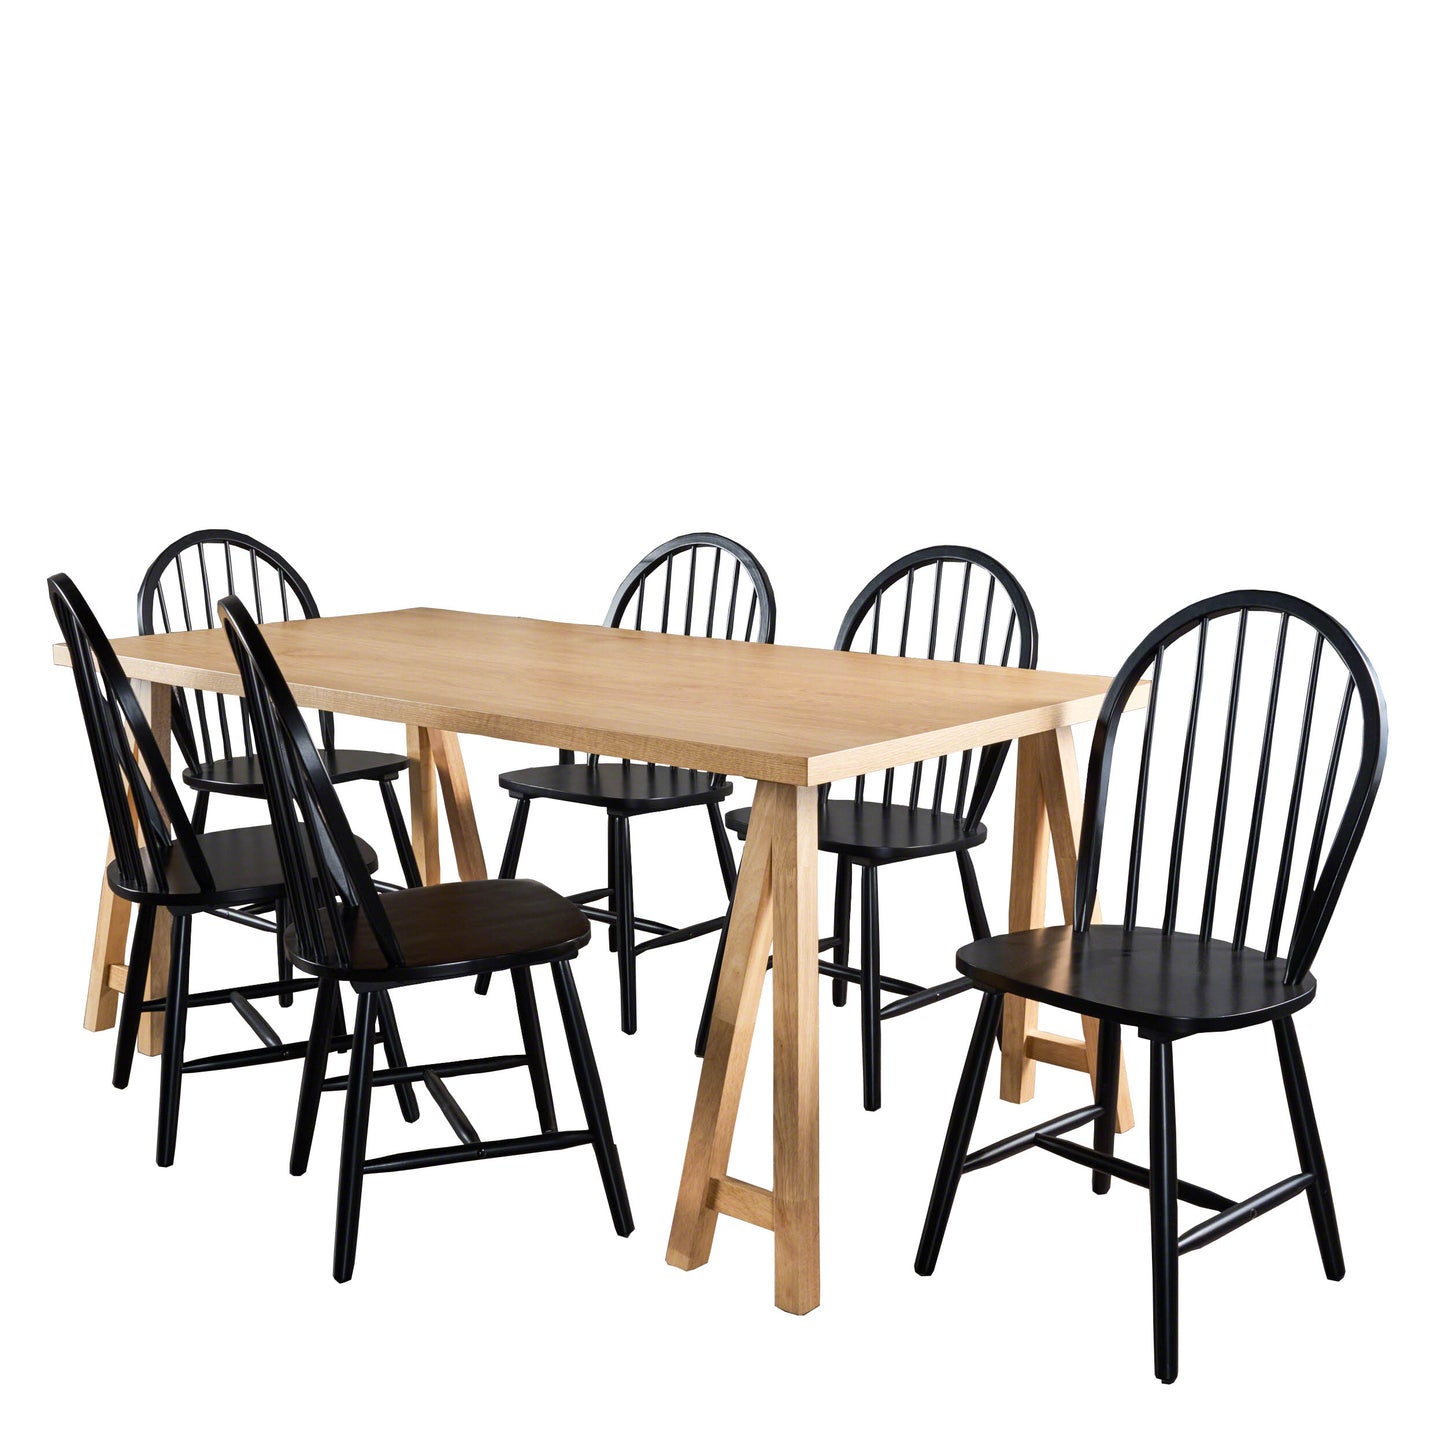 Angela Farmhouse Cottage 7 Piece Faux Wood Dining Set with Rubberwood Chairs